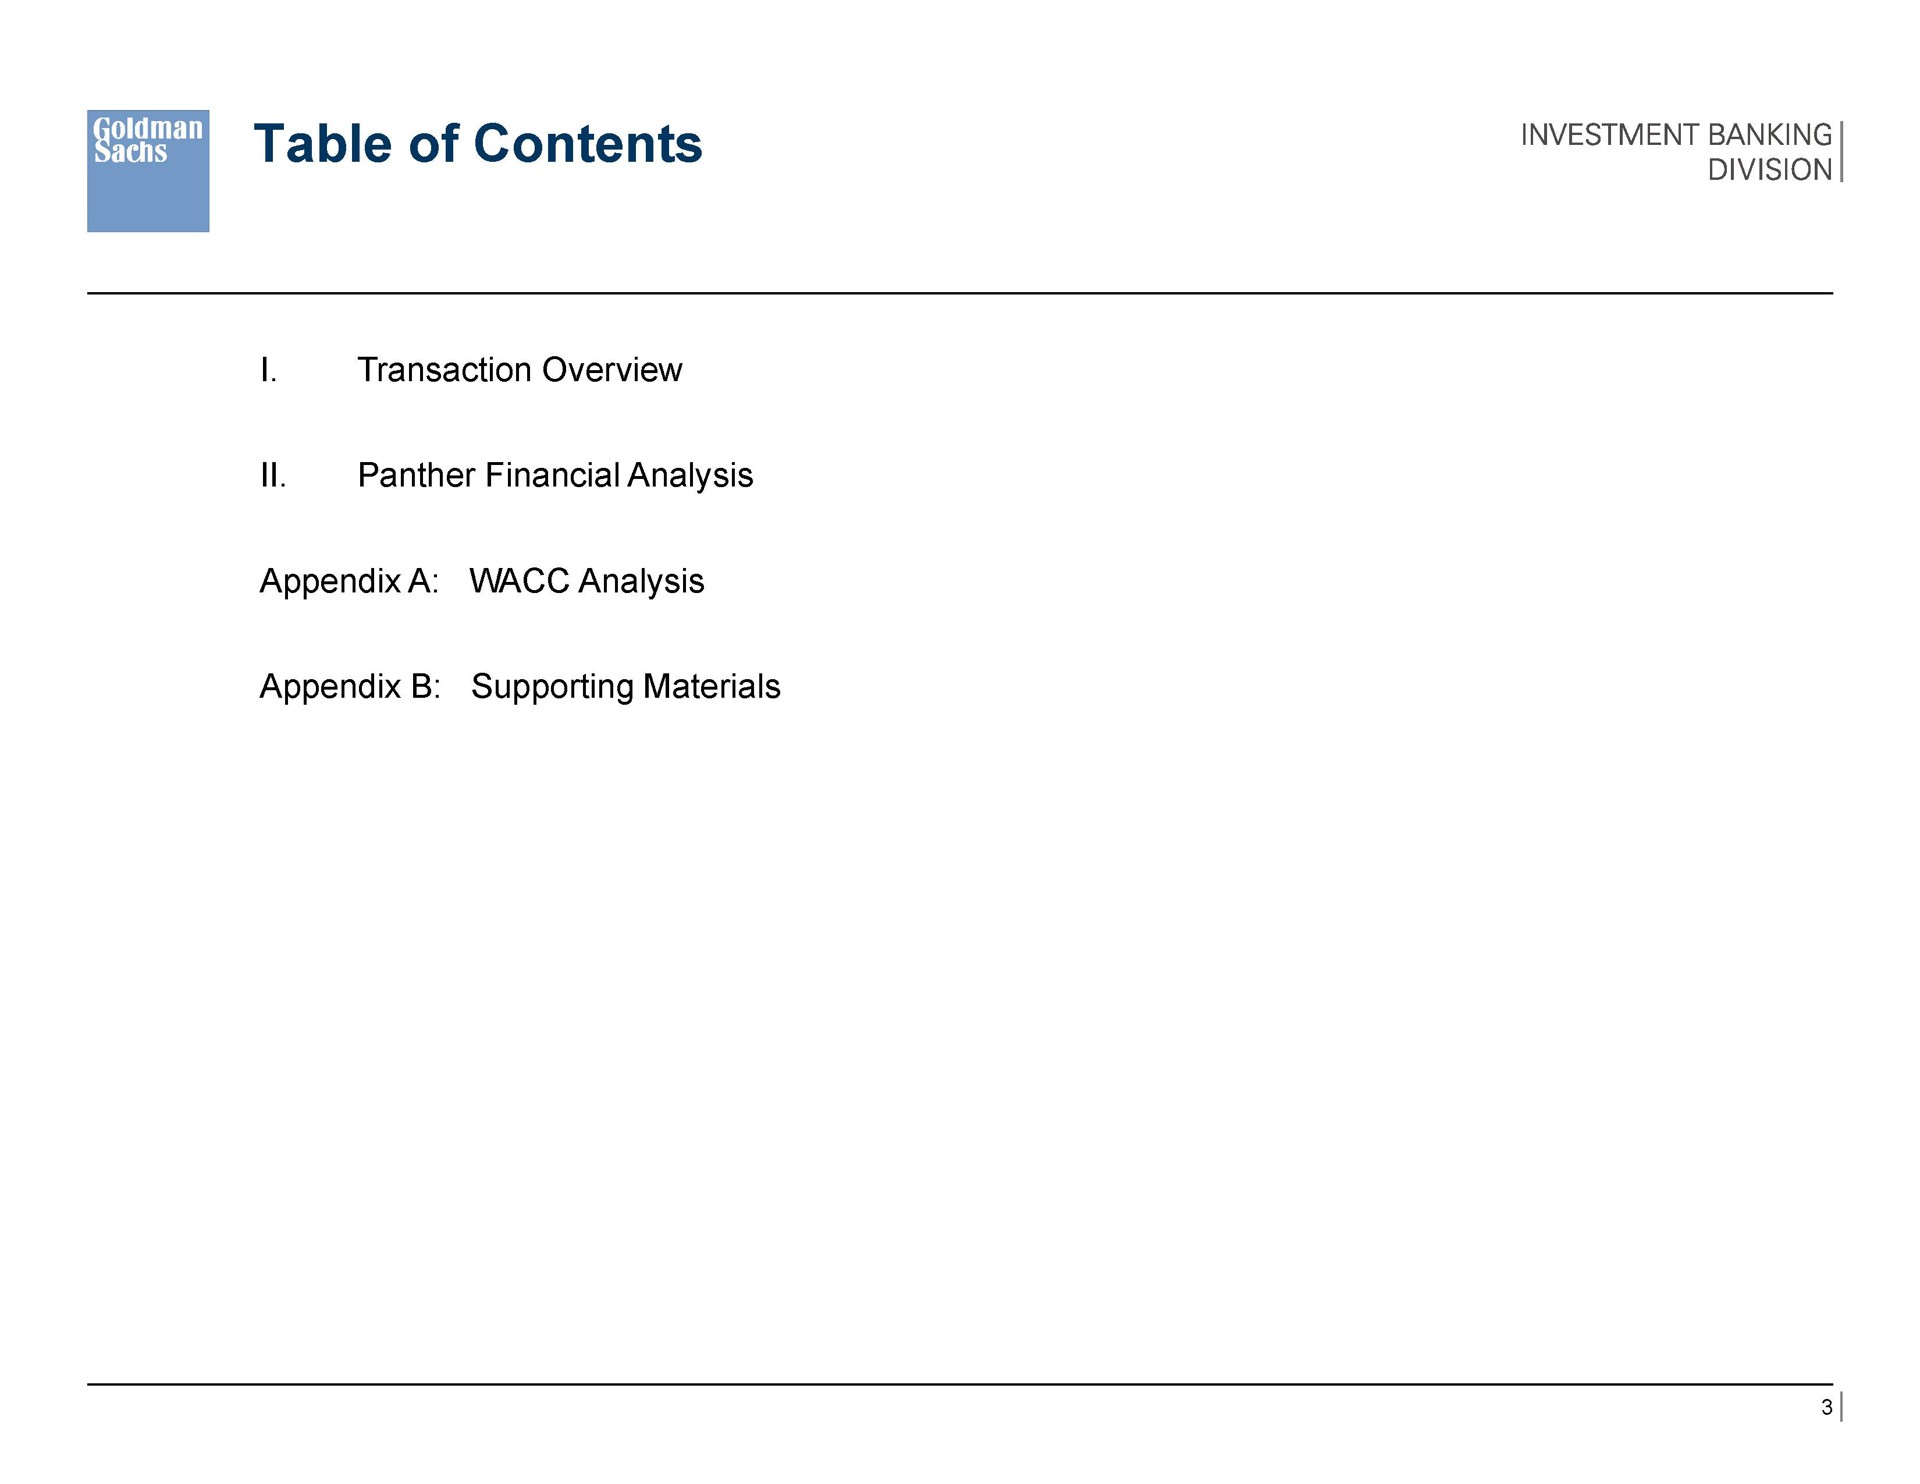 table of contents | Goldman Sachs